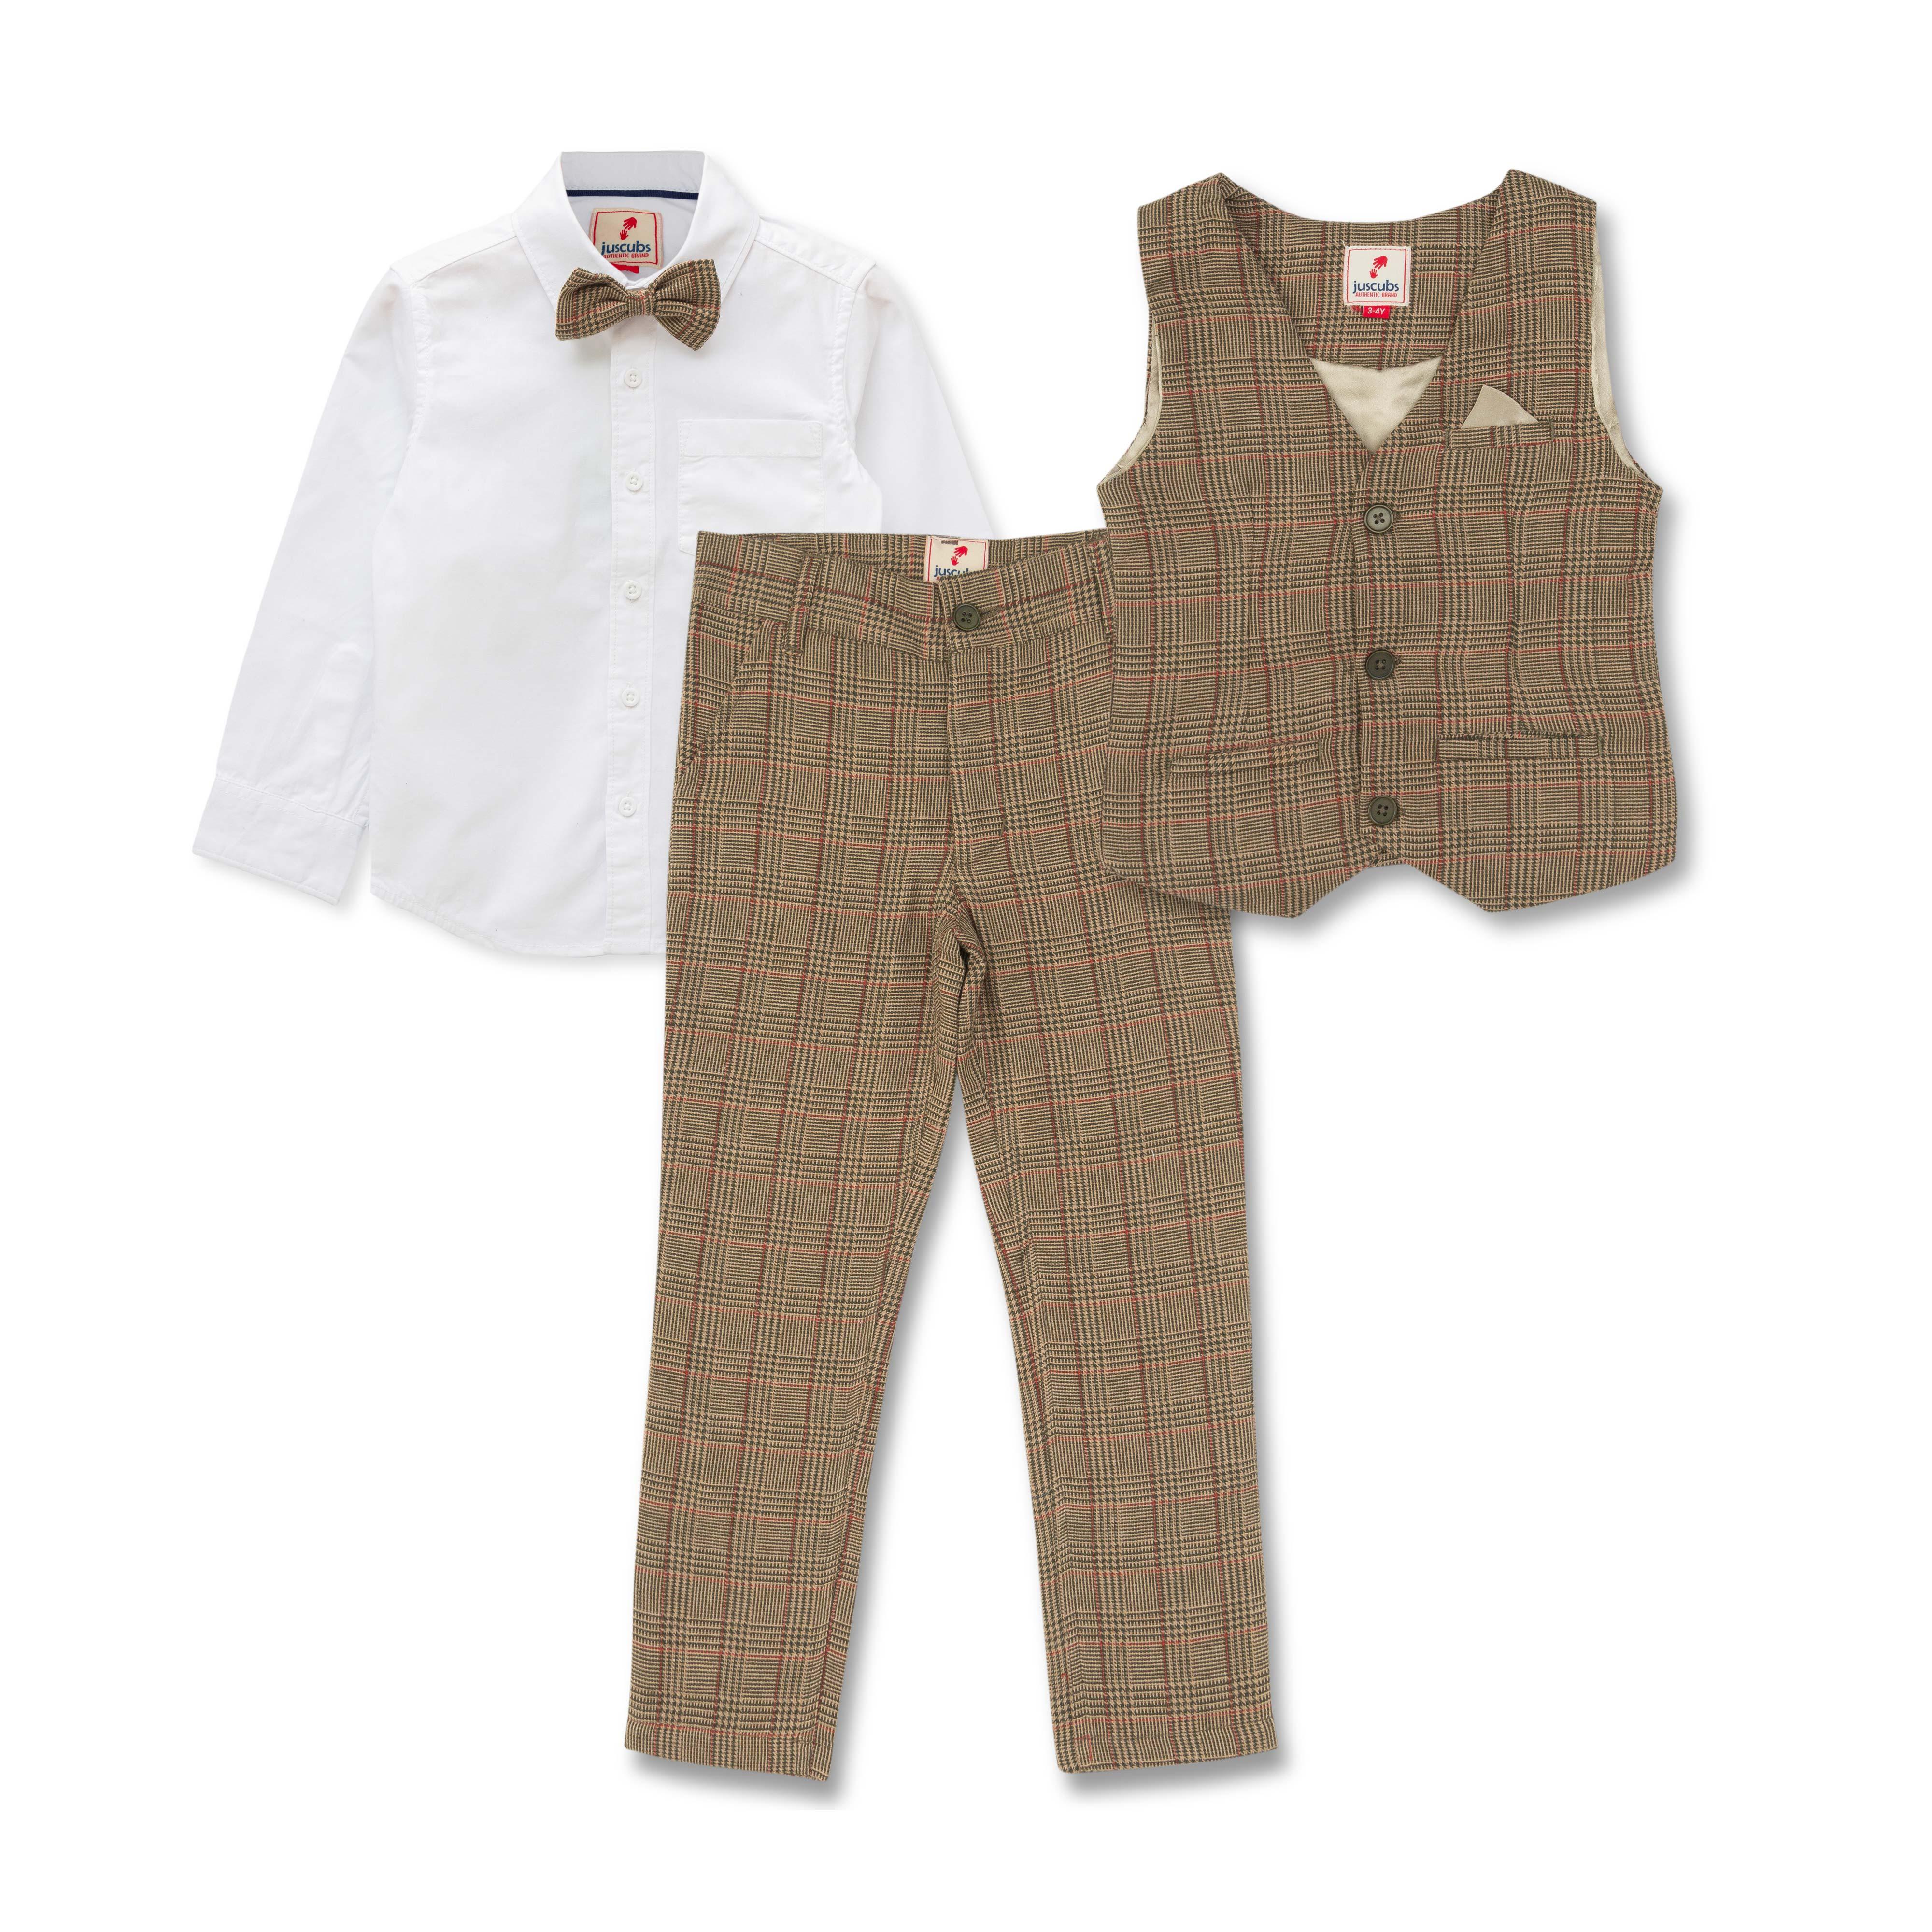 YOUNG BOYS FULL SLEEVES CHECKED COAT SUIT SET - BROWN - Juscubs